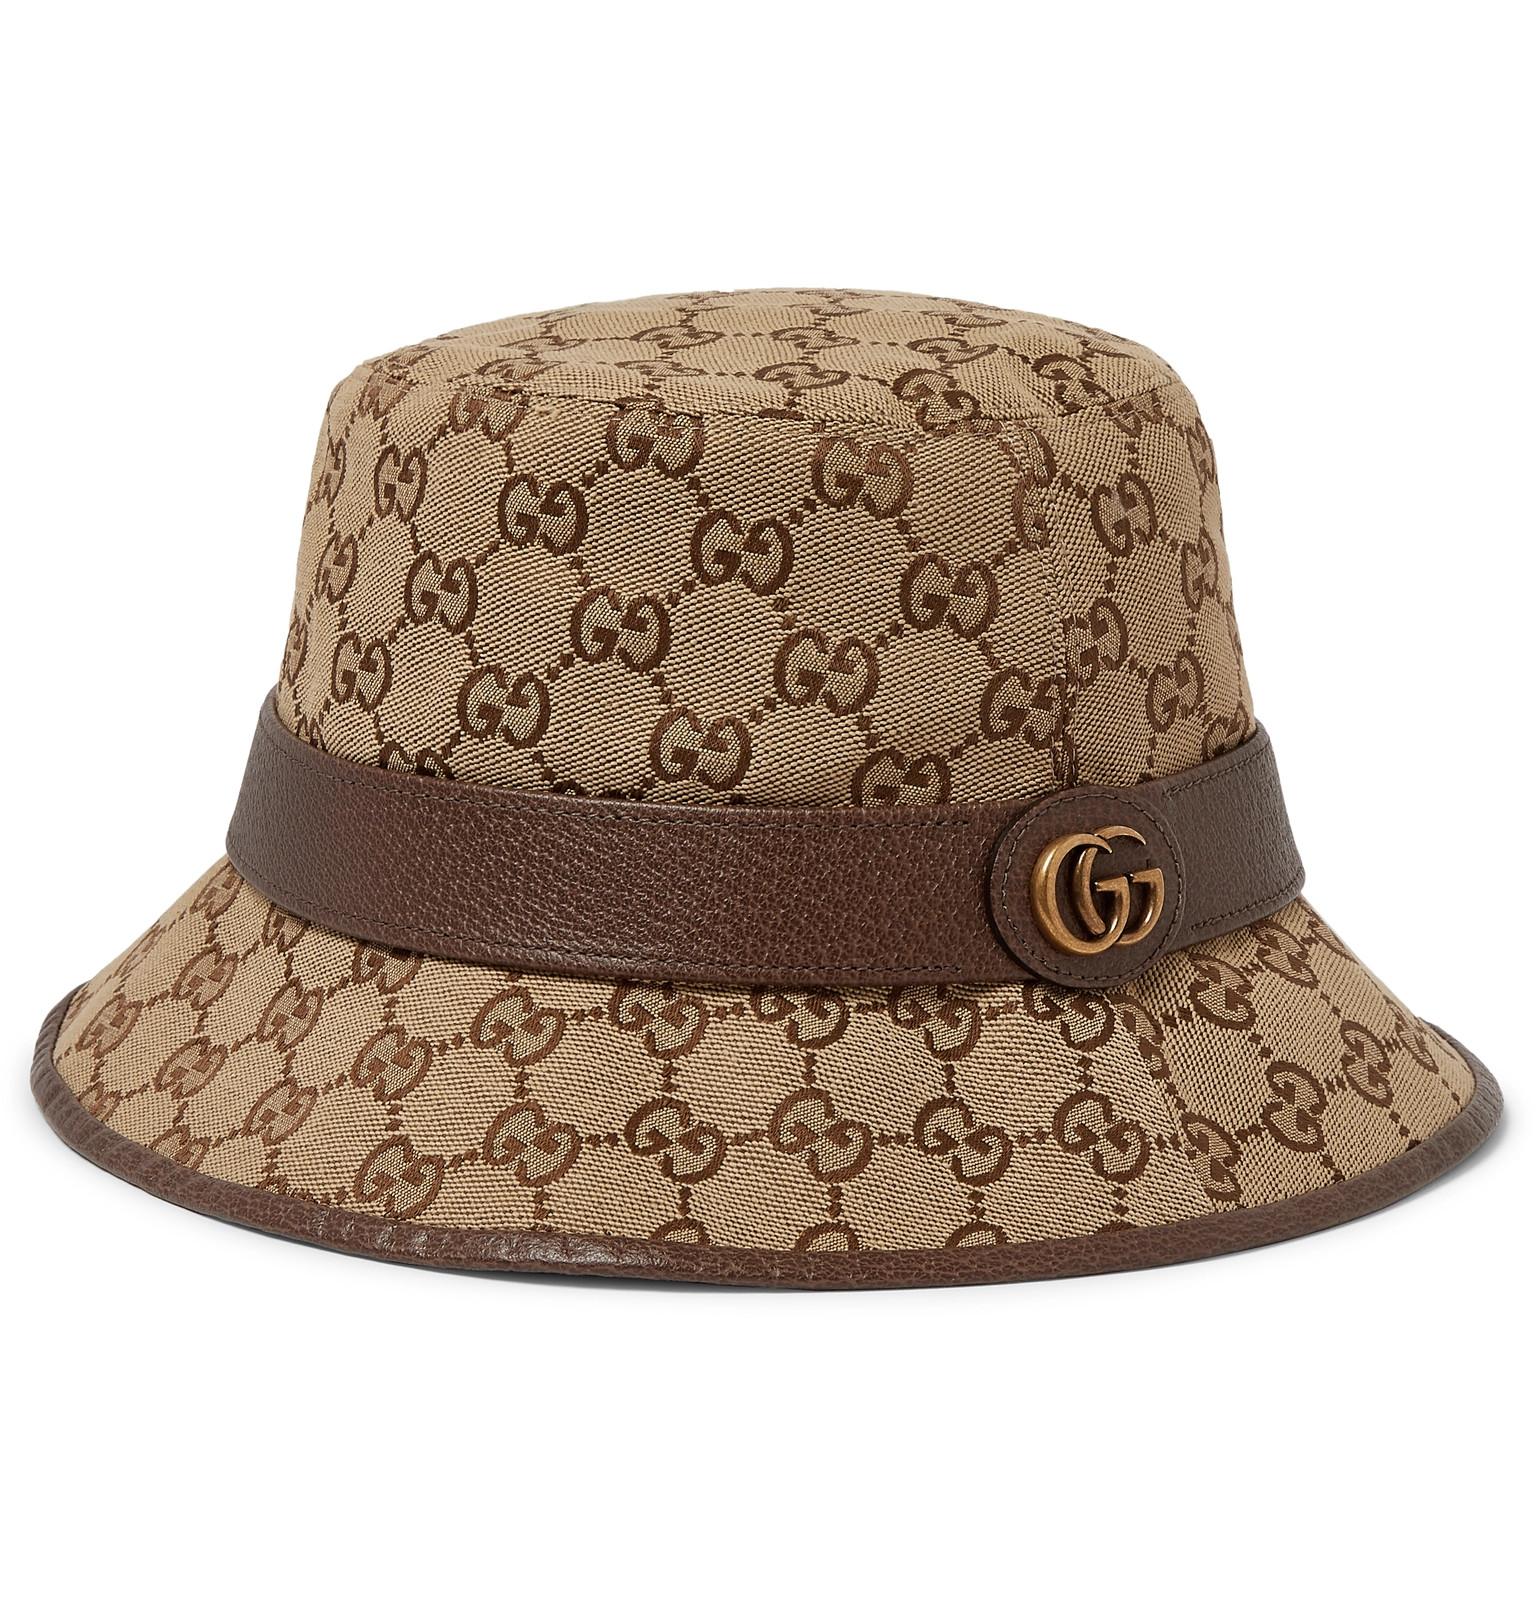 Gucci Leather-trimmed Monogrammed Canvas Bucket Hat in Brown for Men - Lyst